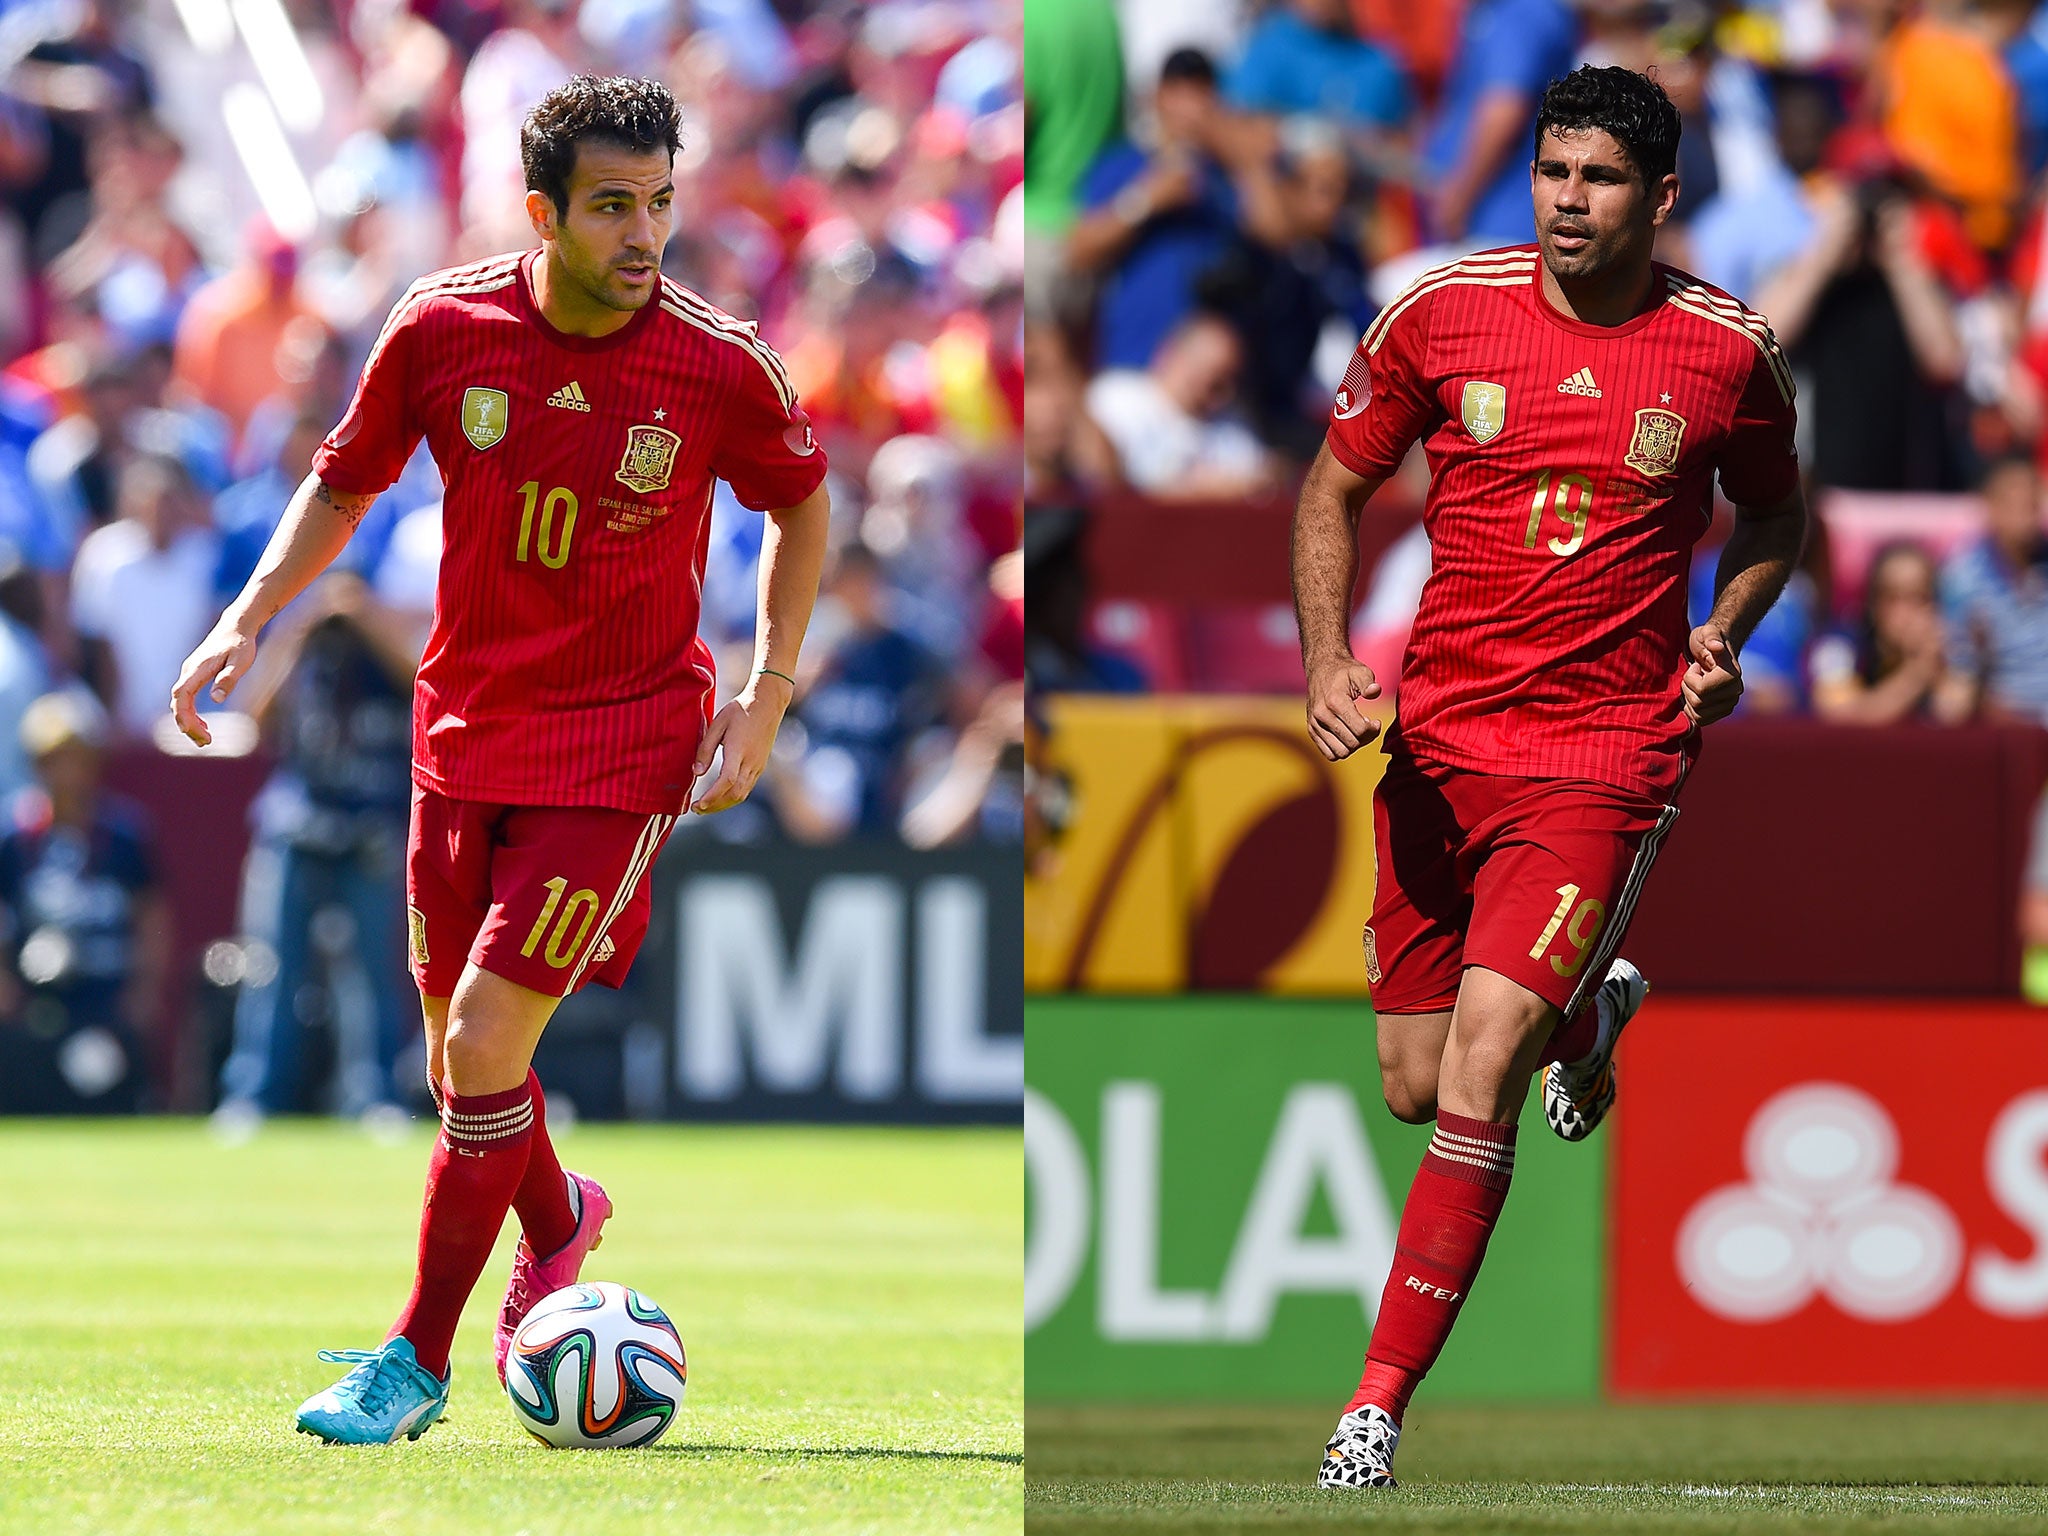 Cesc Fabregas and Diego Costa could both join Chelsea this week